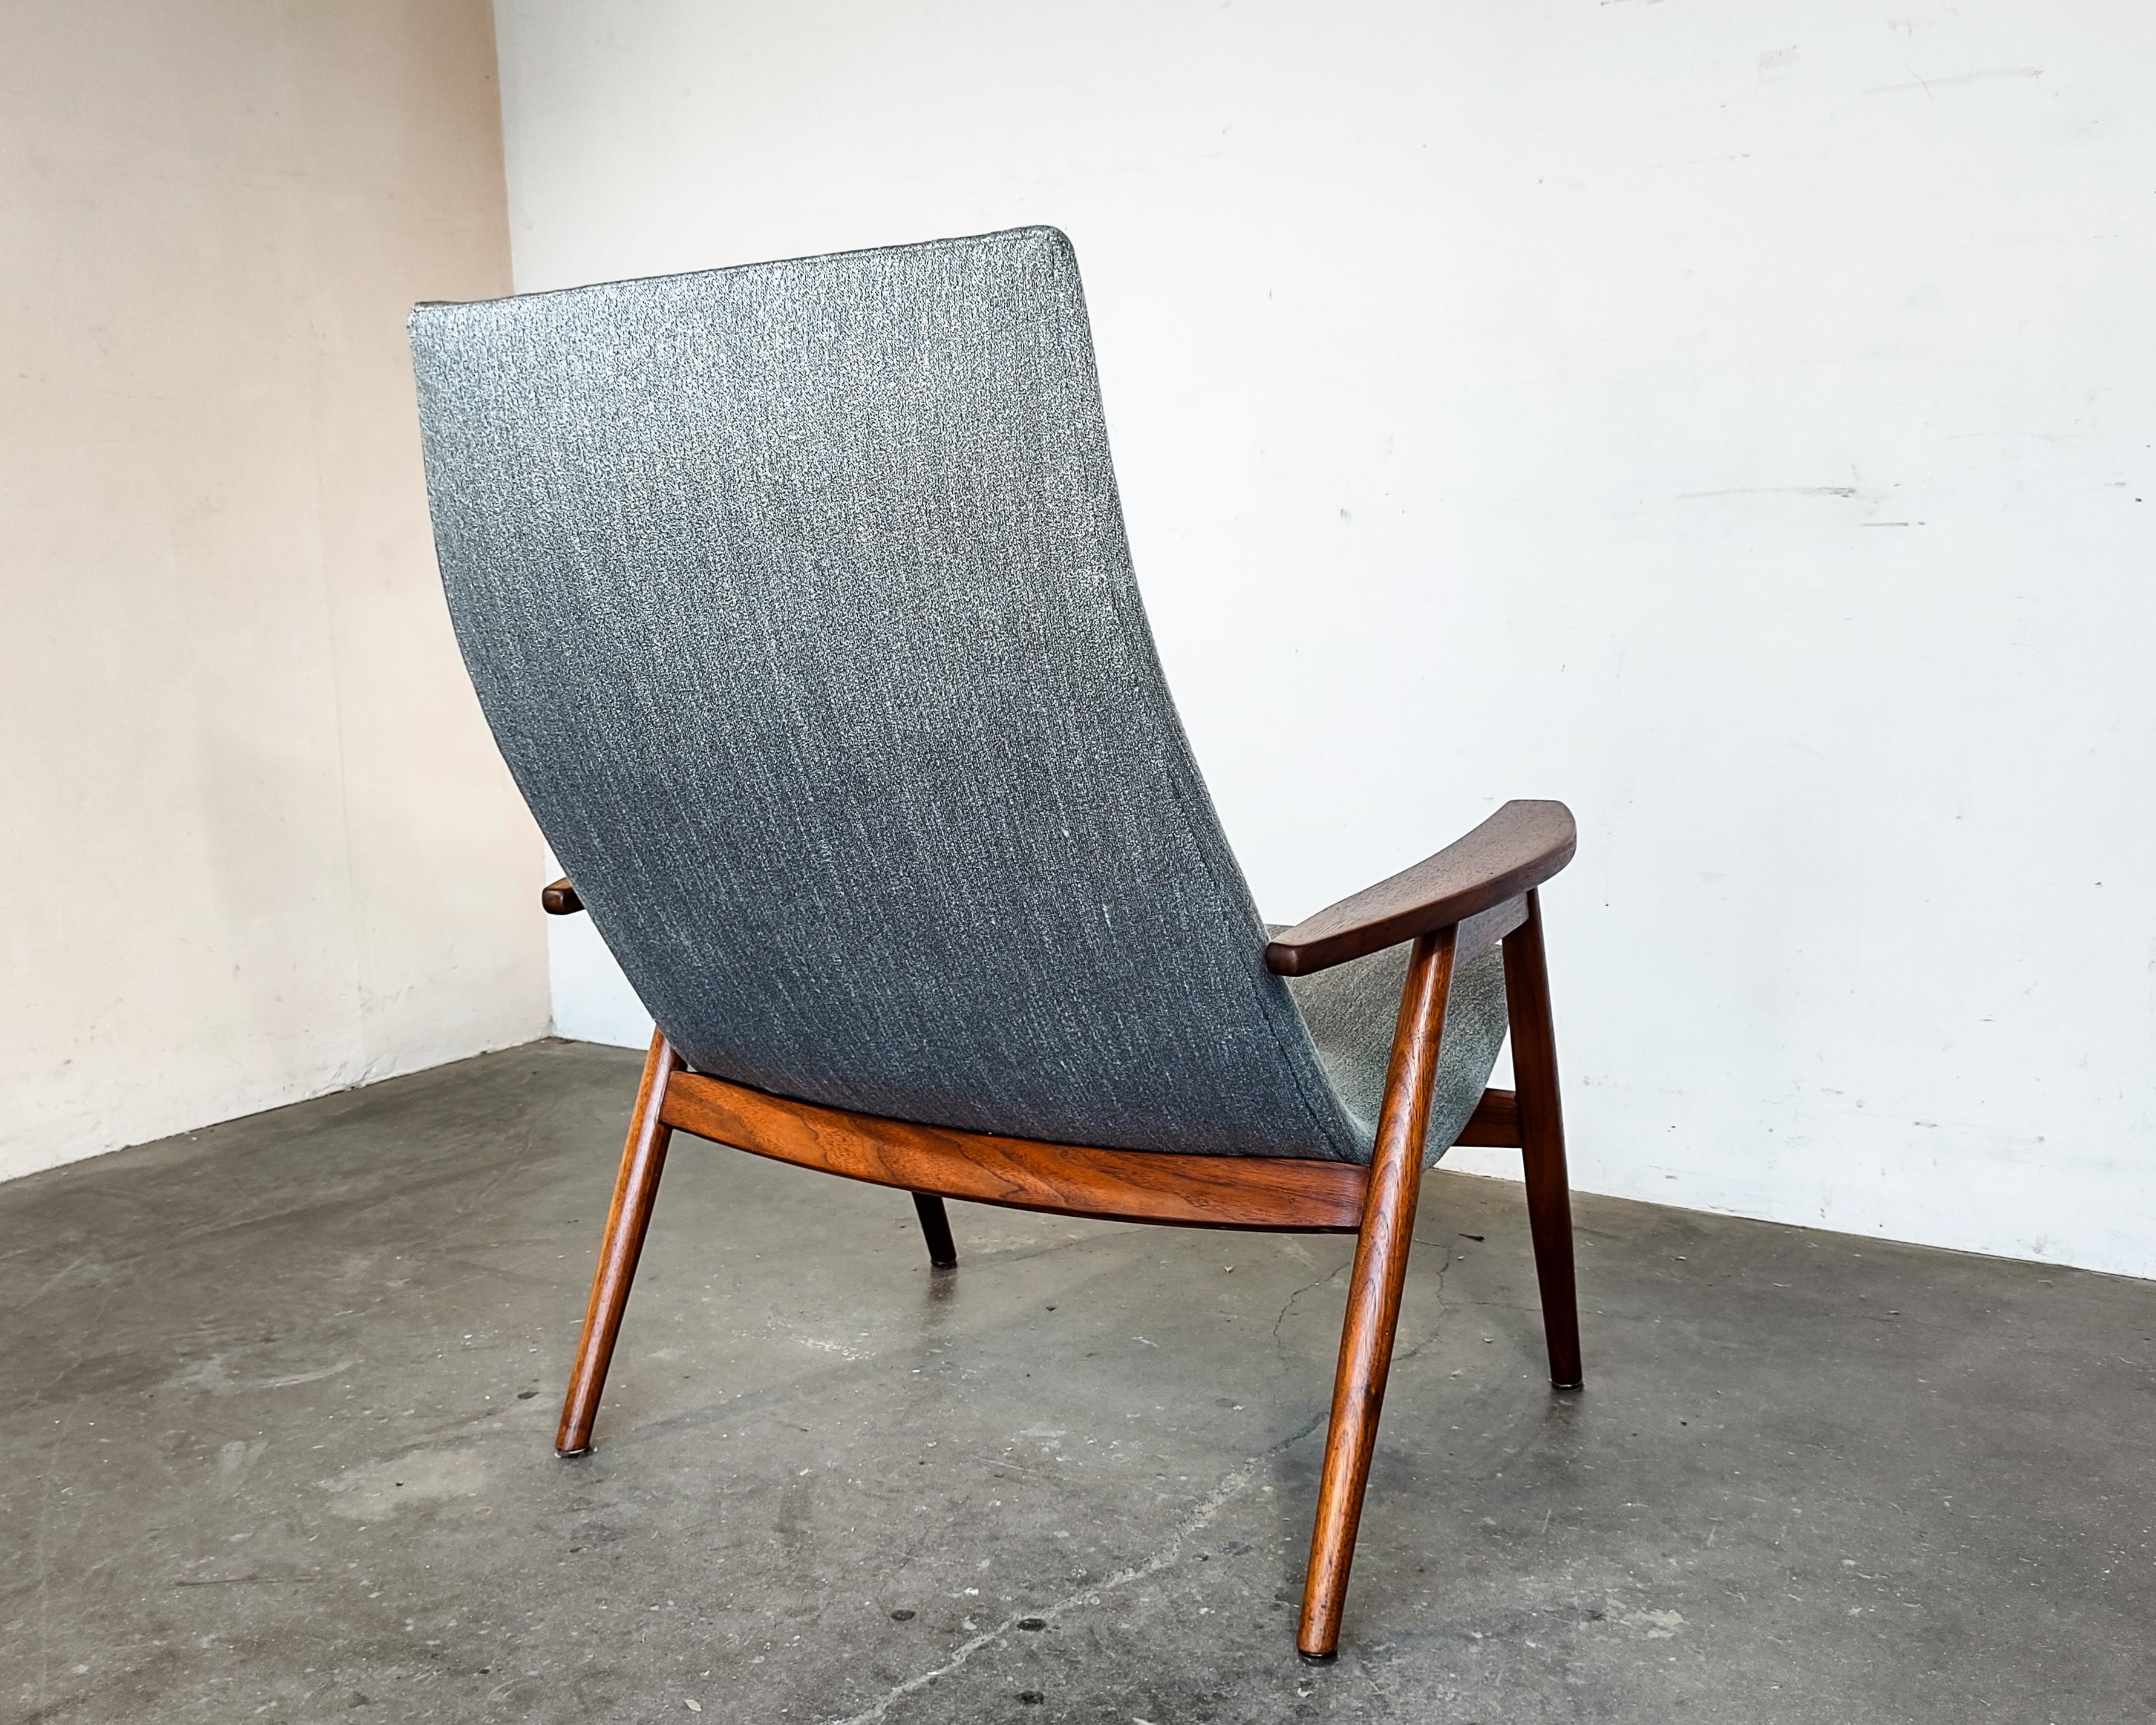 20th Century Mid-Century Modern Eggshell Lounge Chair by Allan Gould for Thayer Coggin For Sale